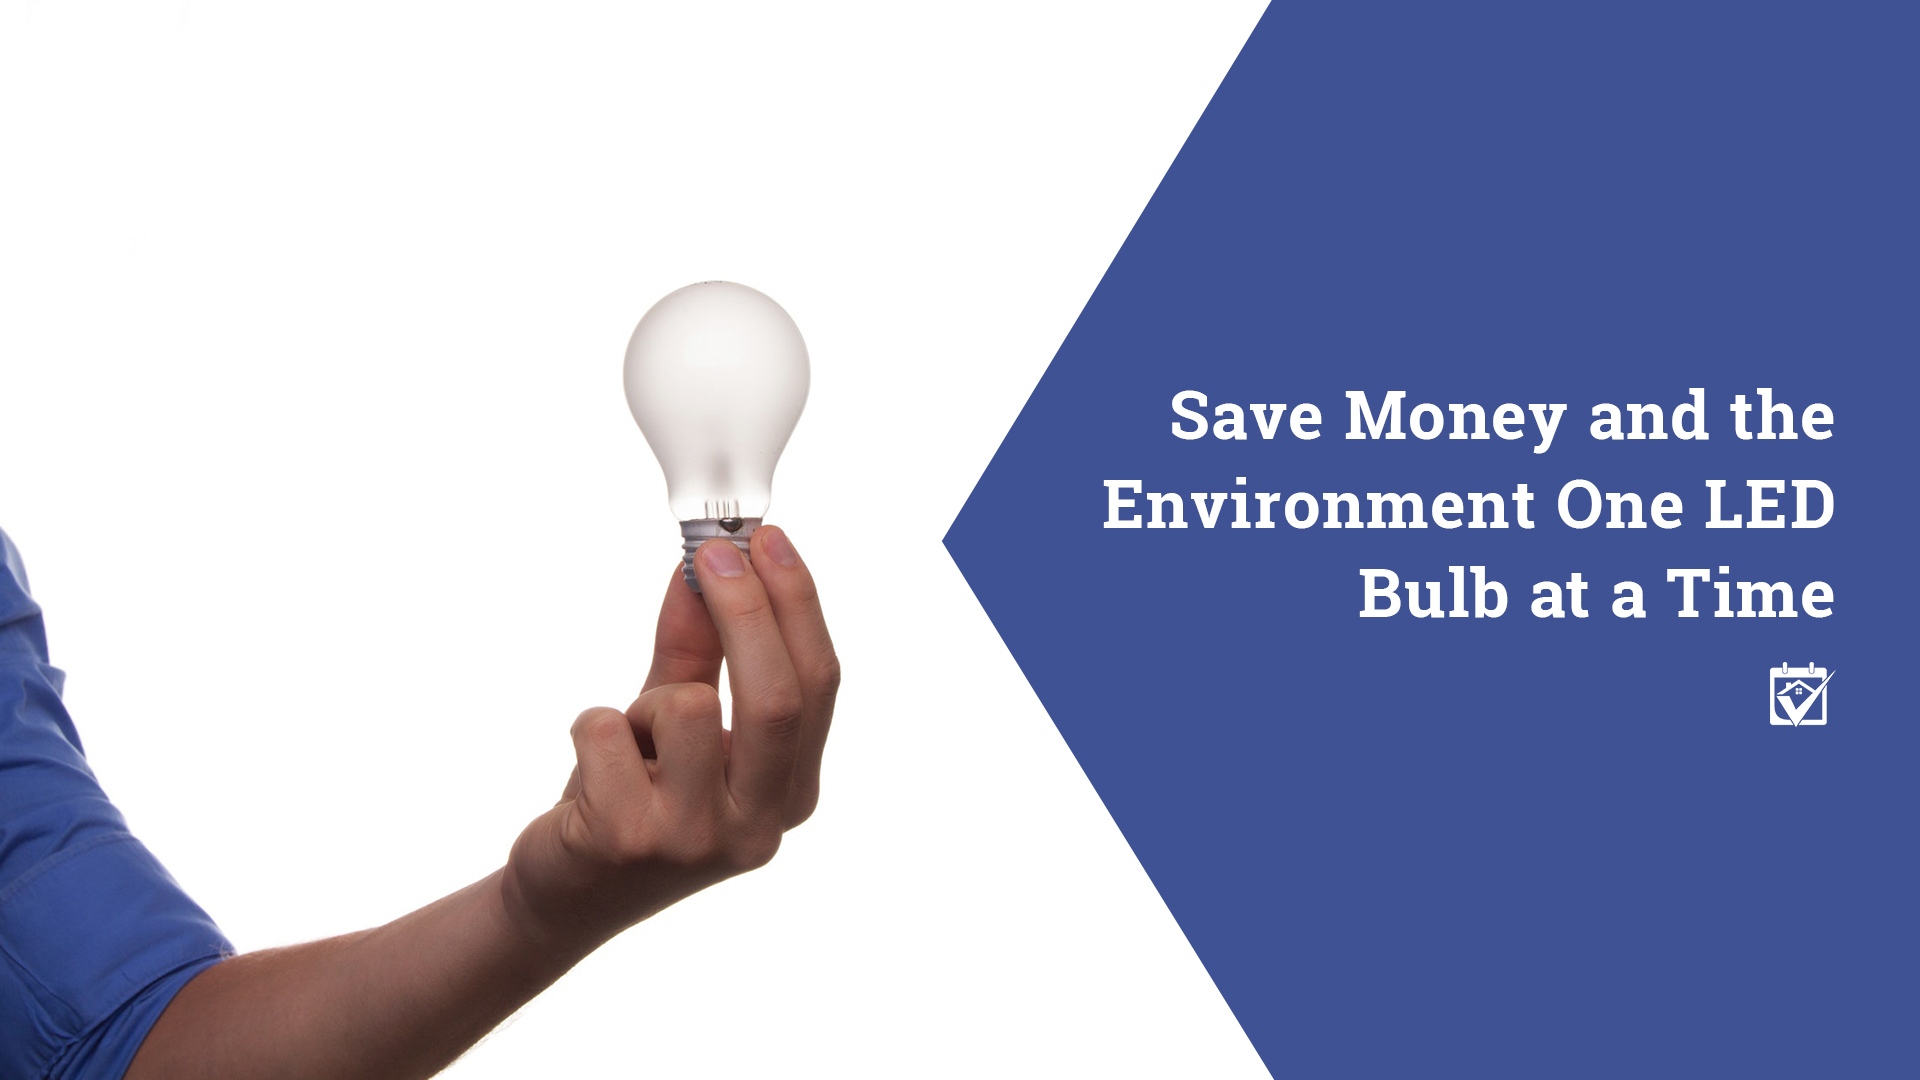 Save Money and The Environment One LED Bulb at a Time